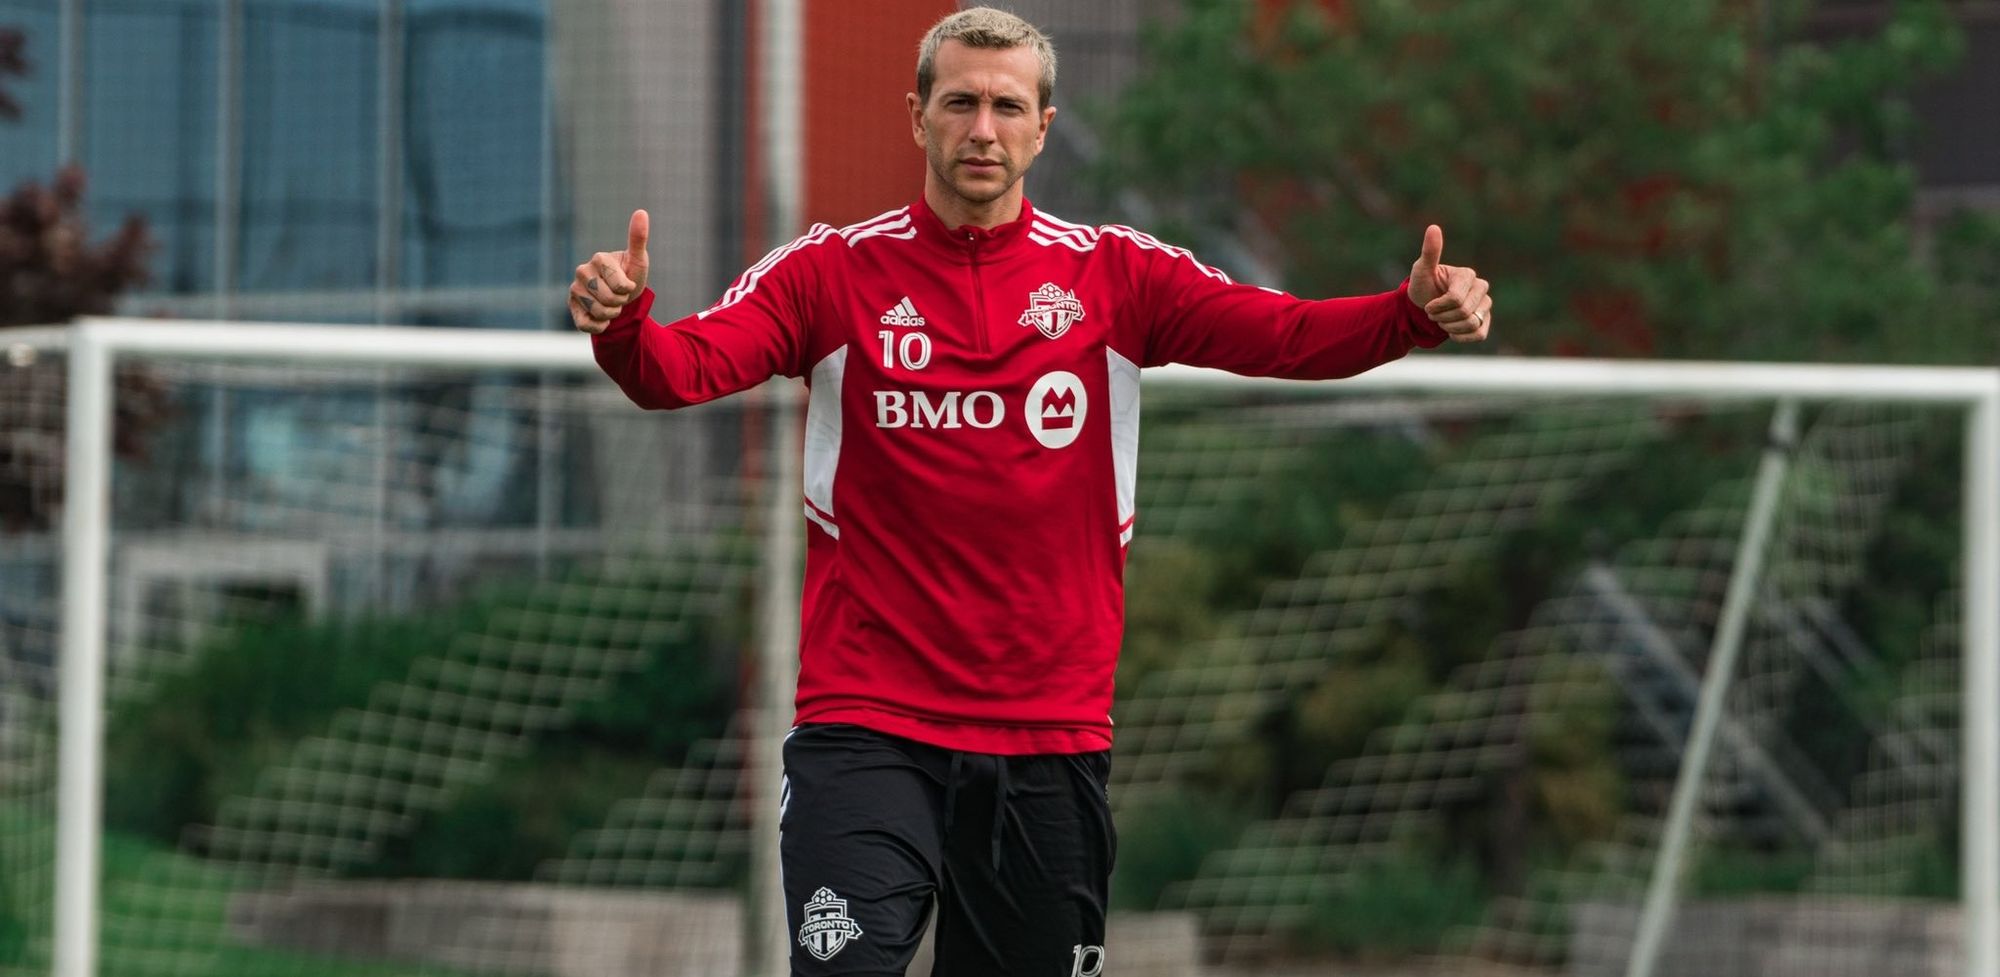 Random thoughts on TFC: Waiting to sign a new DP is the right move